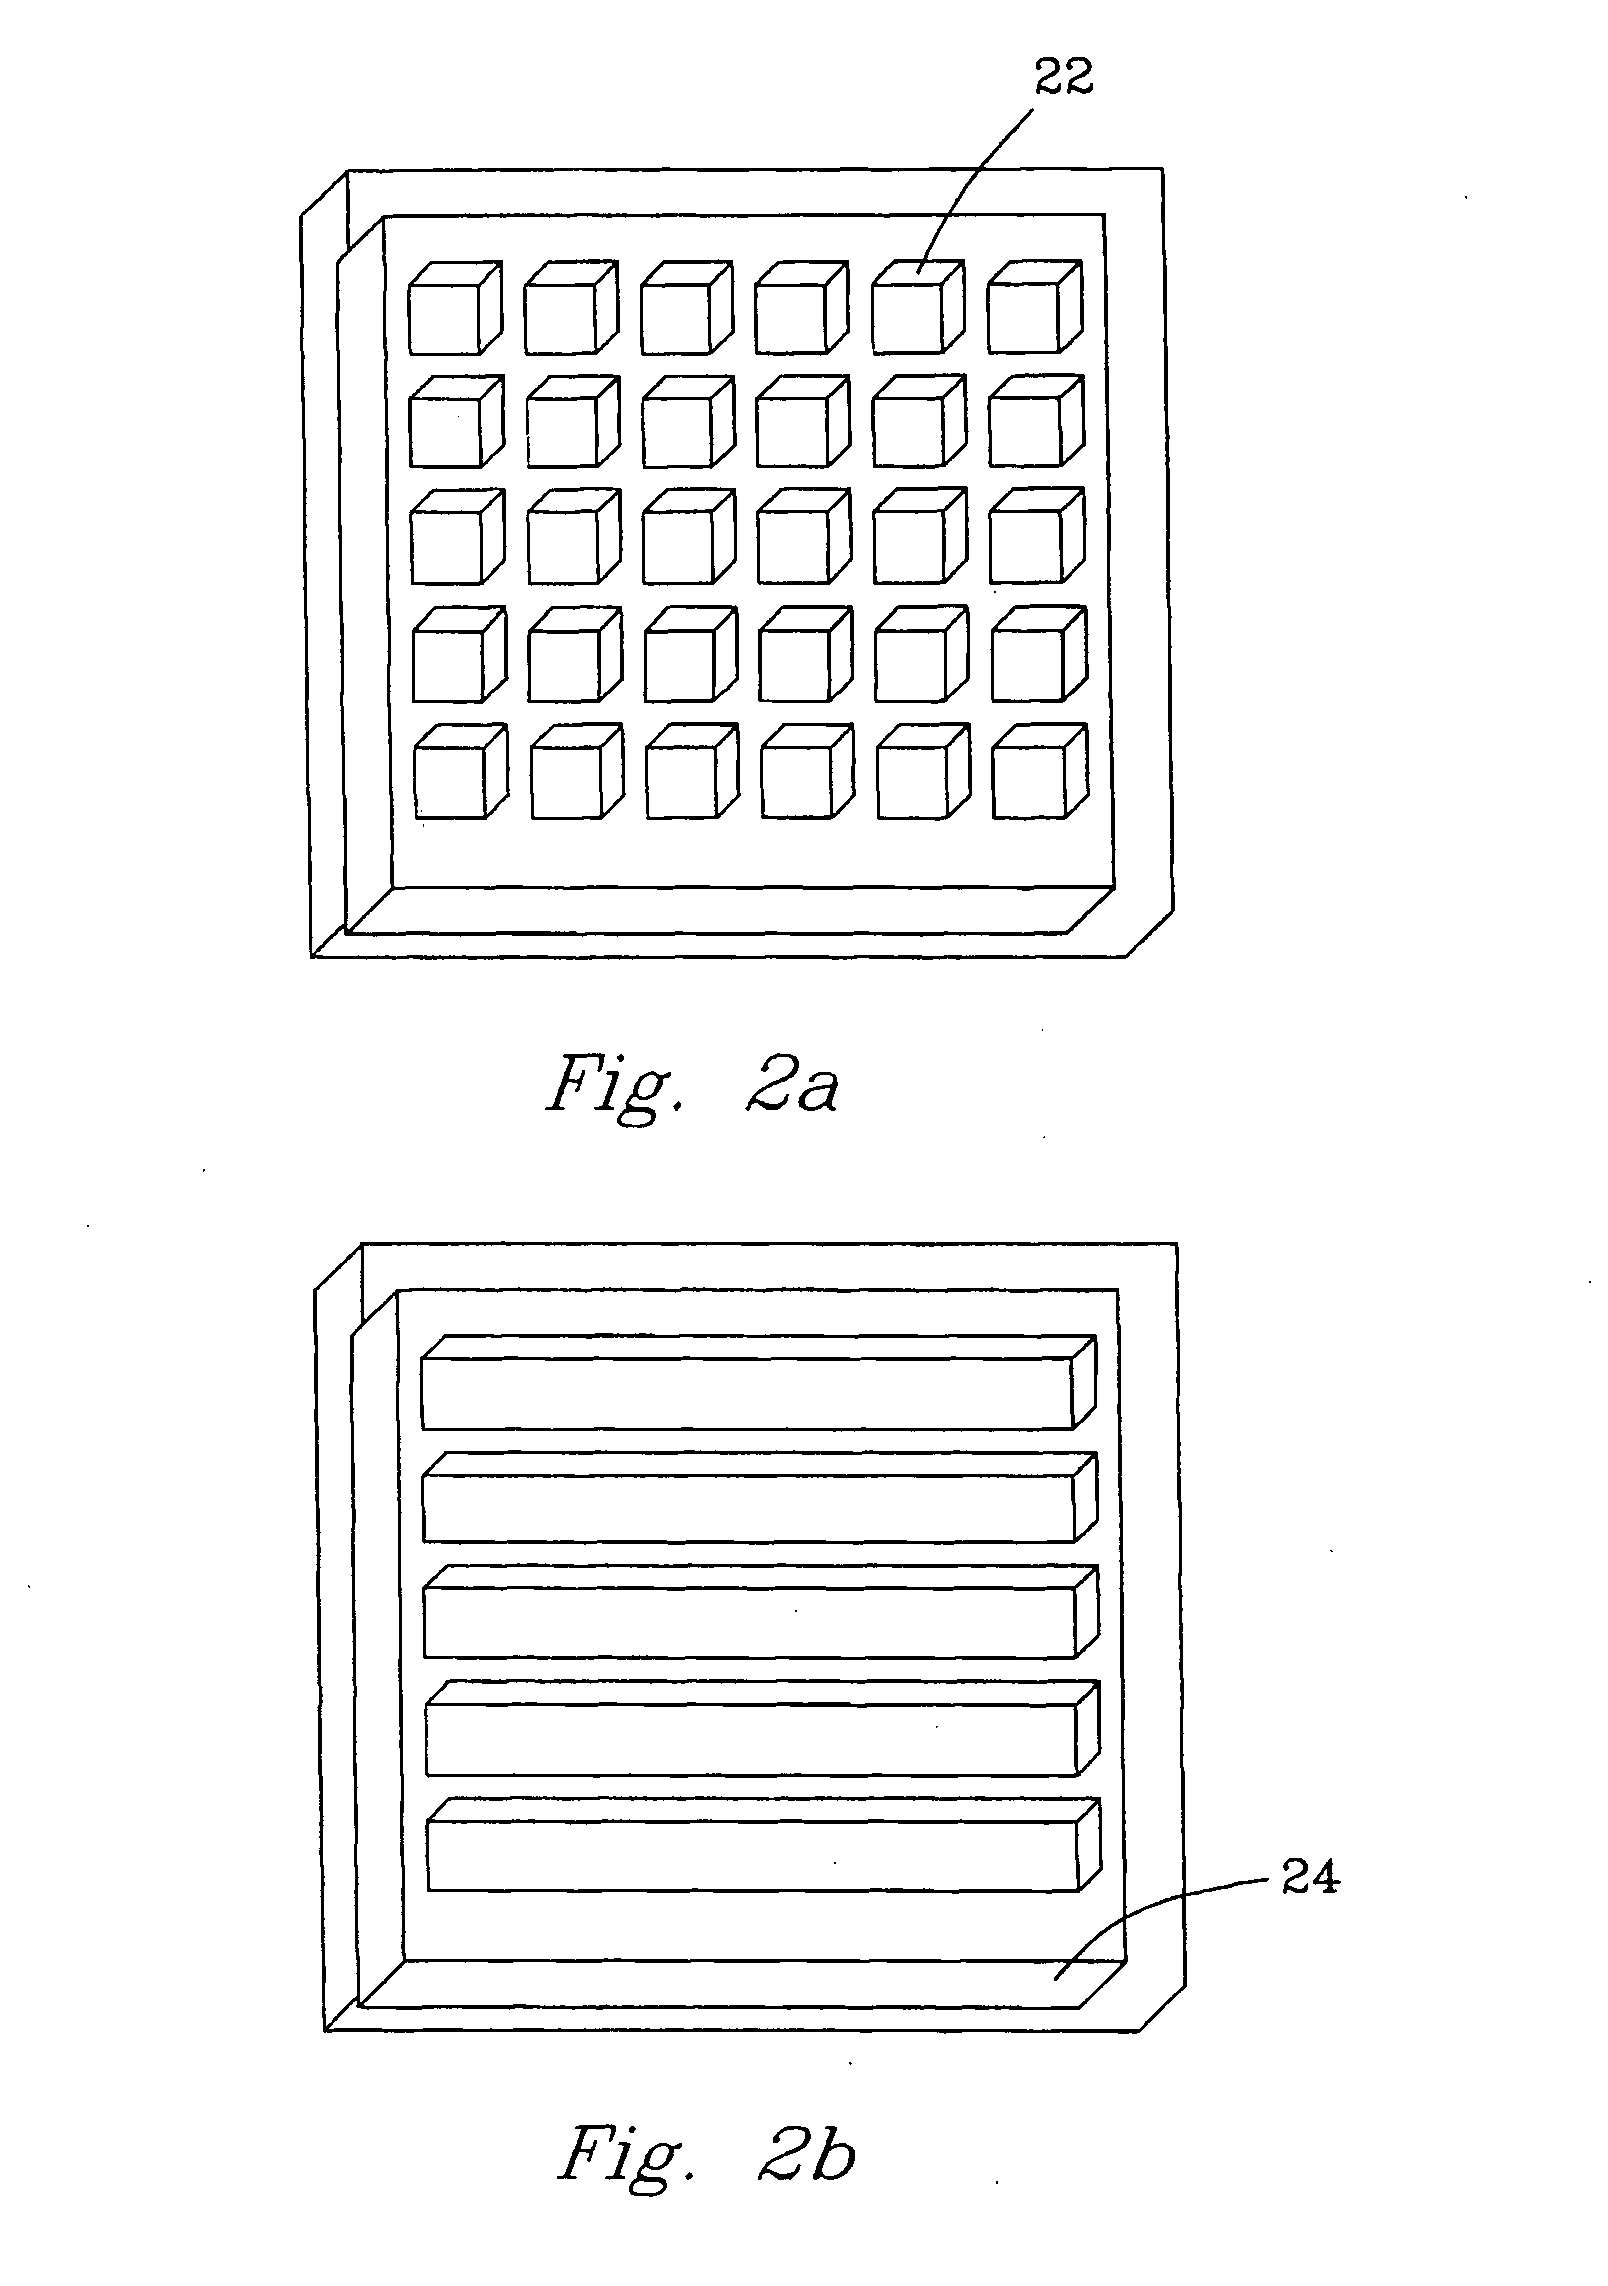 Integrated reactors, methods of making same, and methods of conducting simultaneous exothermic and endothermic reactions